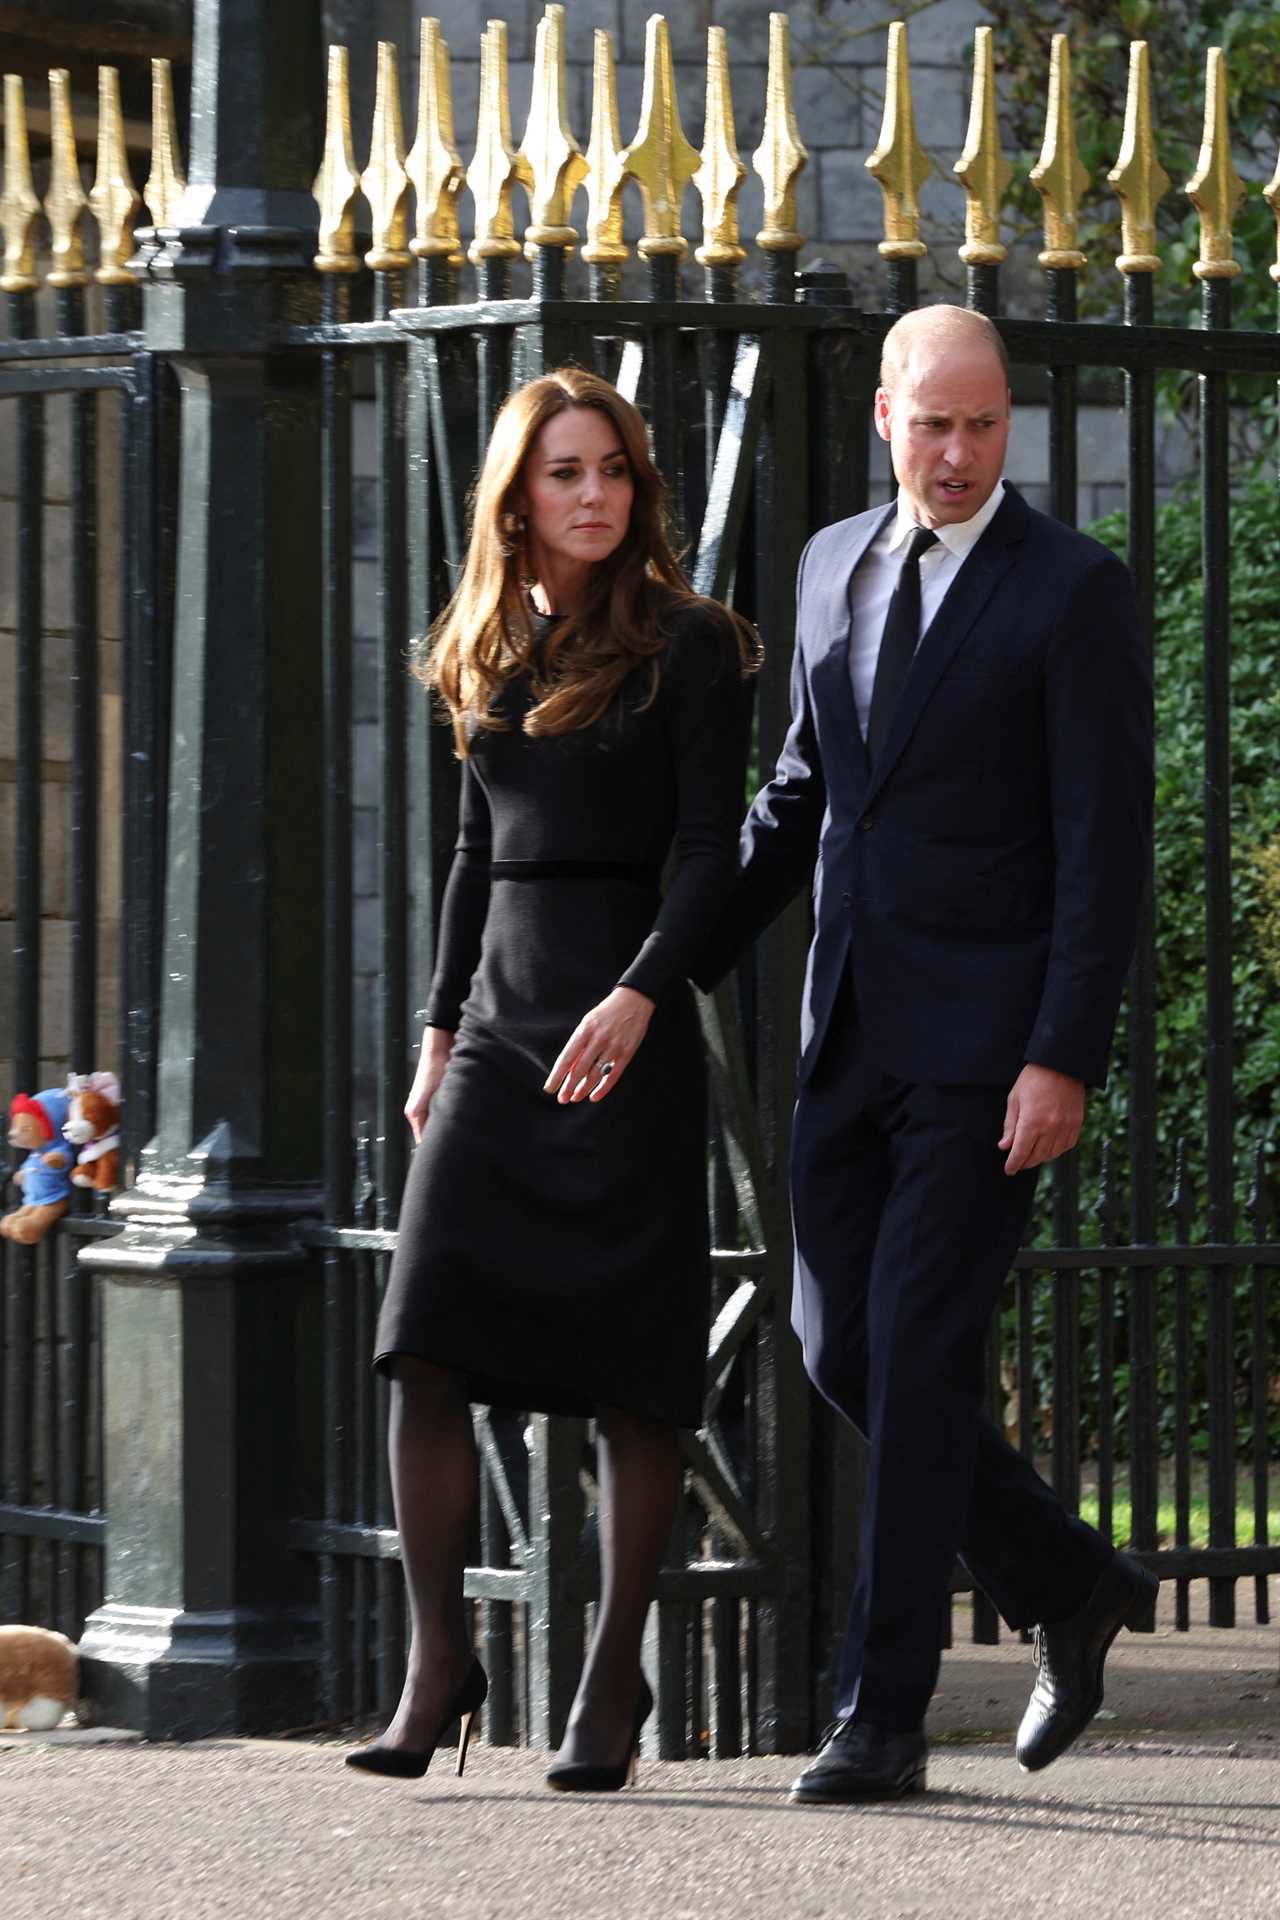 Body language expert reveals why Prince William and Kate Middleton are rarely spotted holding hands in public